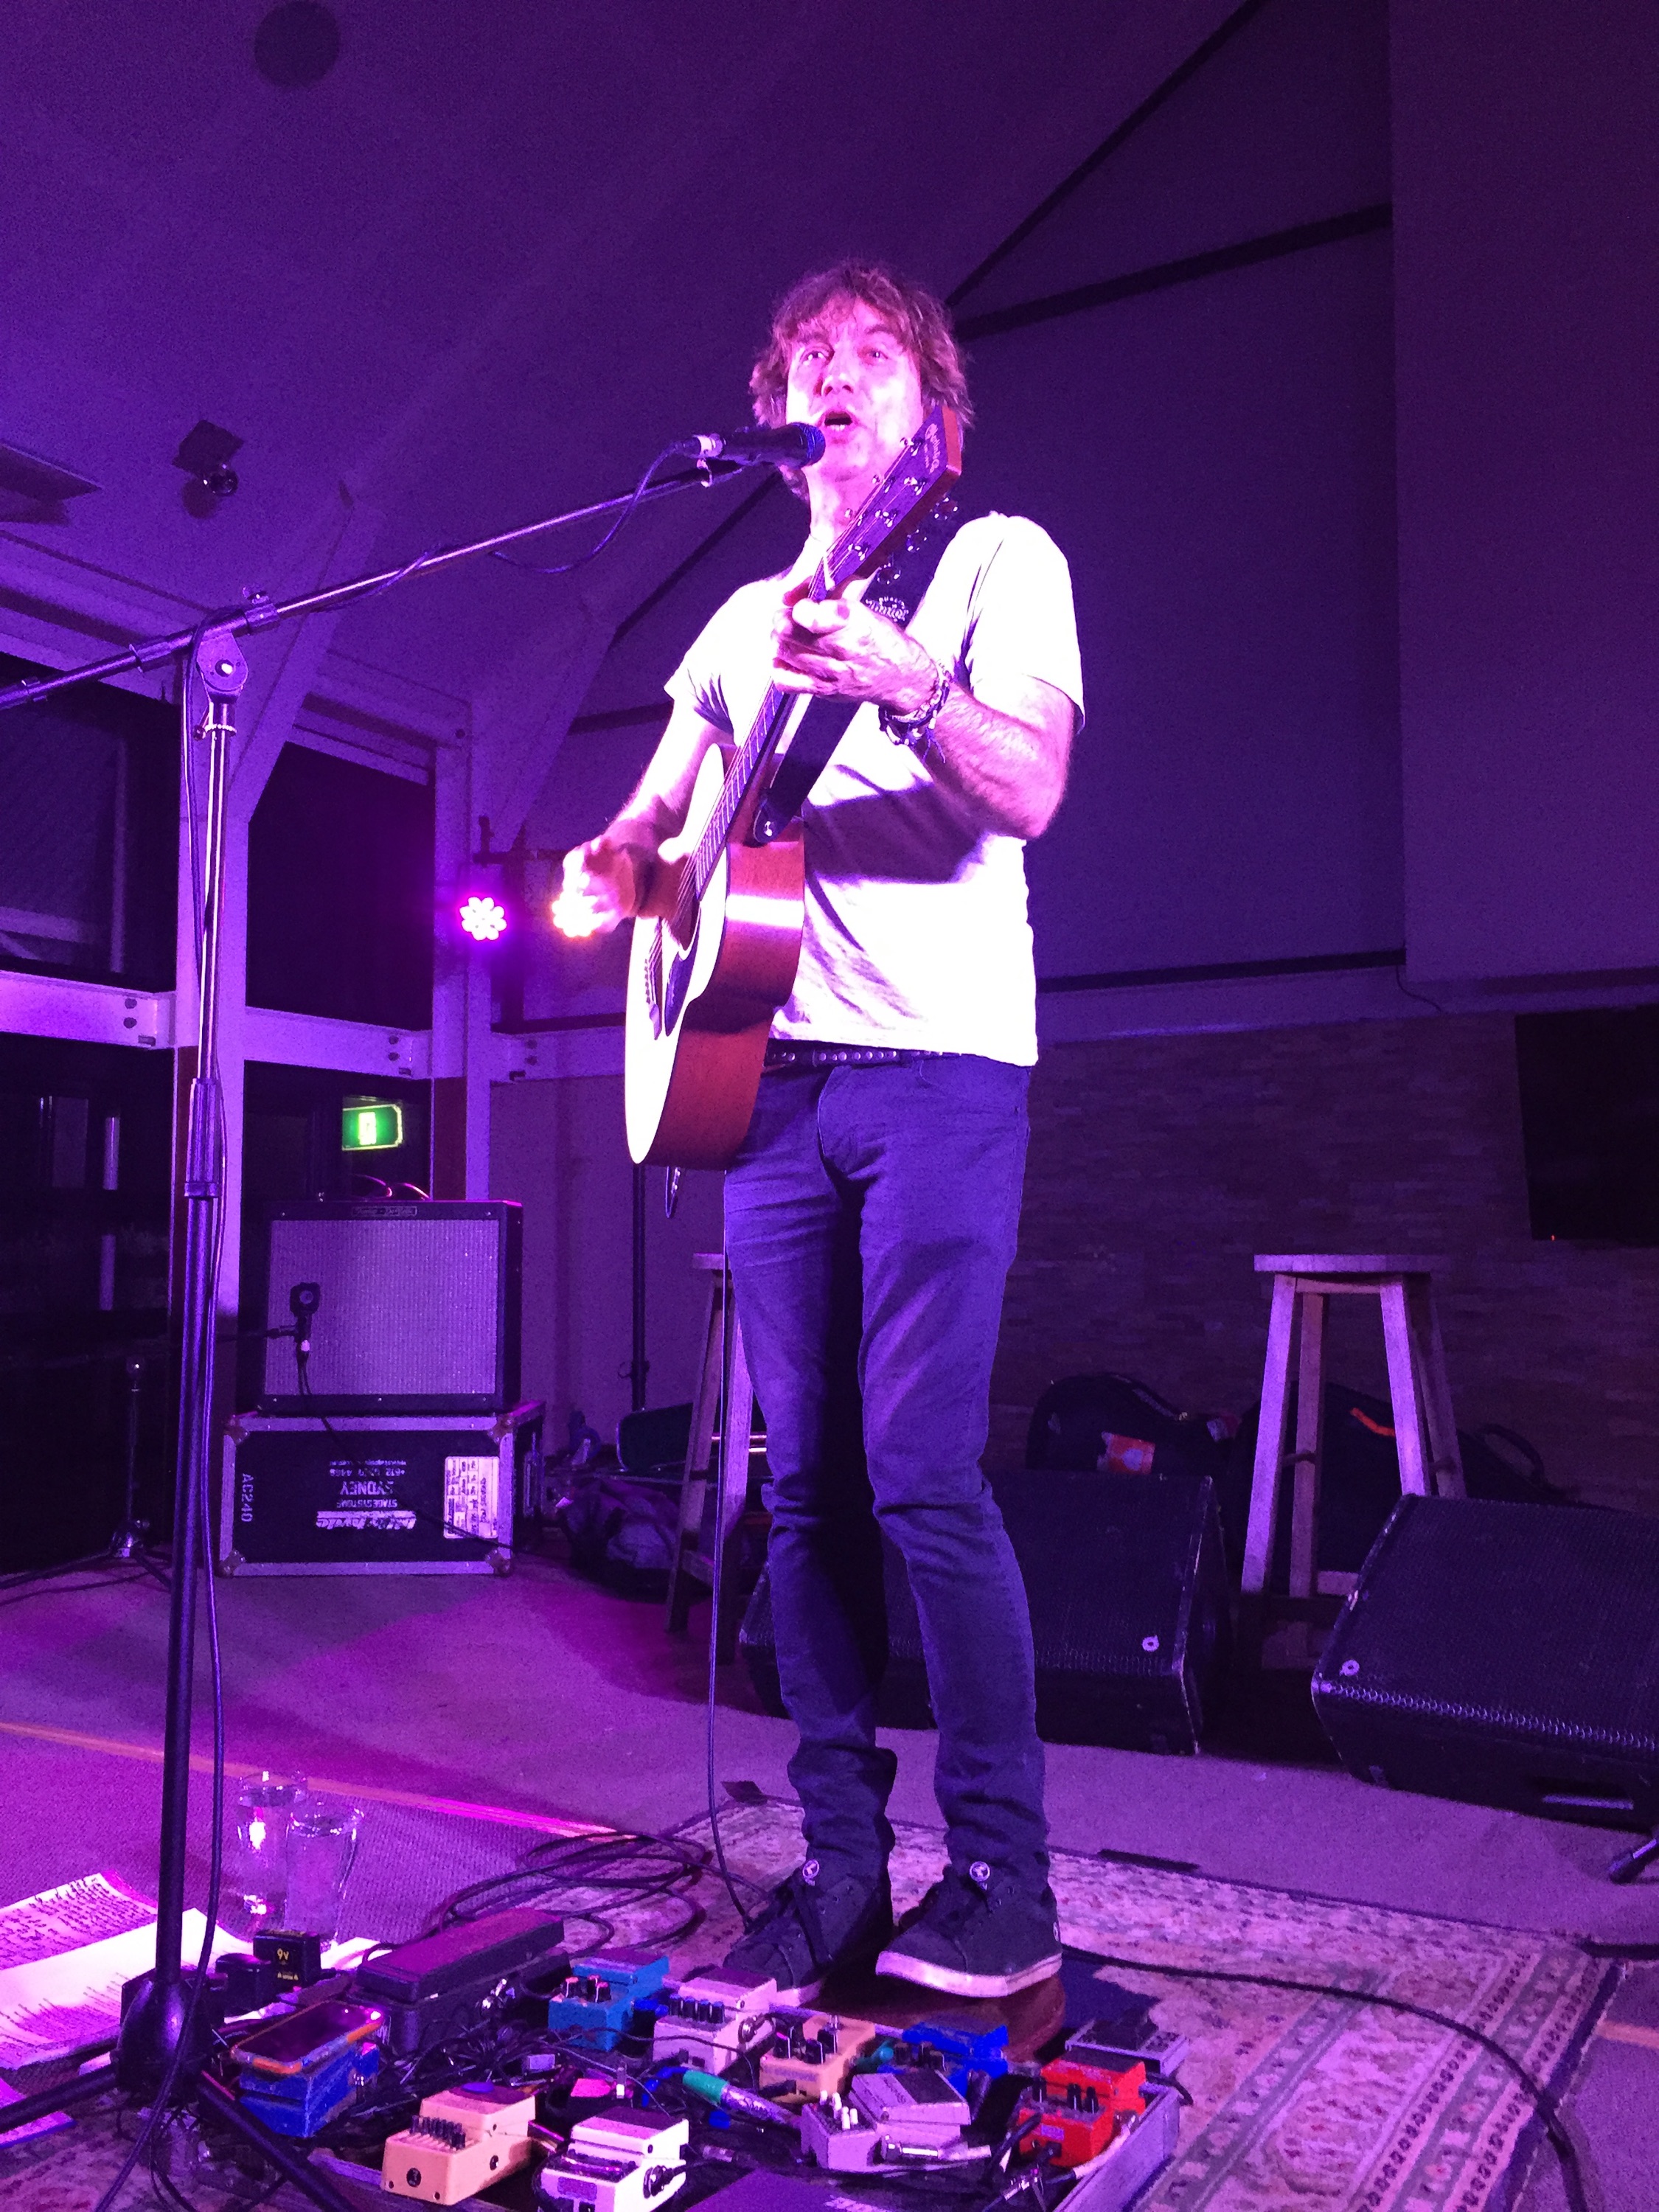 Greg solo supporting Jon Stevens at Caves June 6th 2015